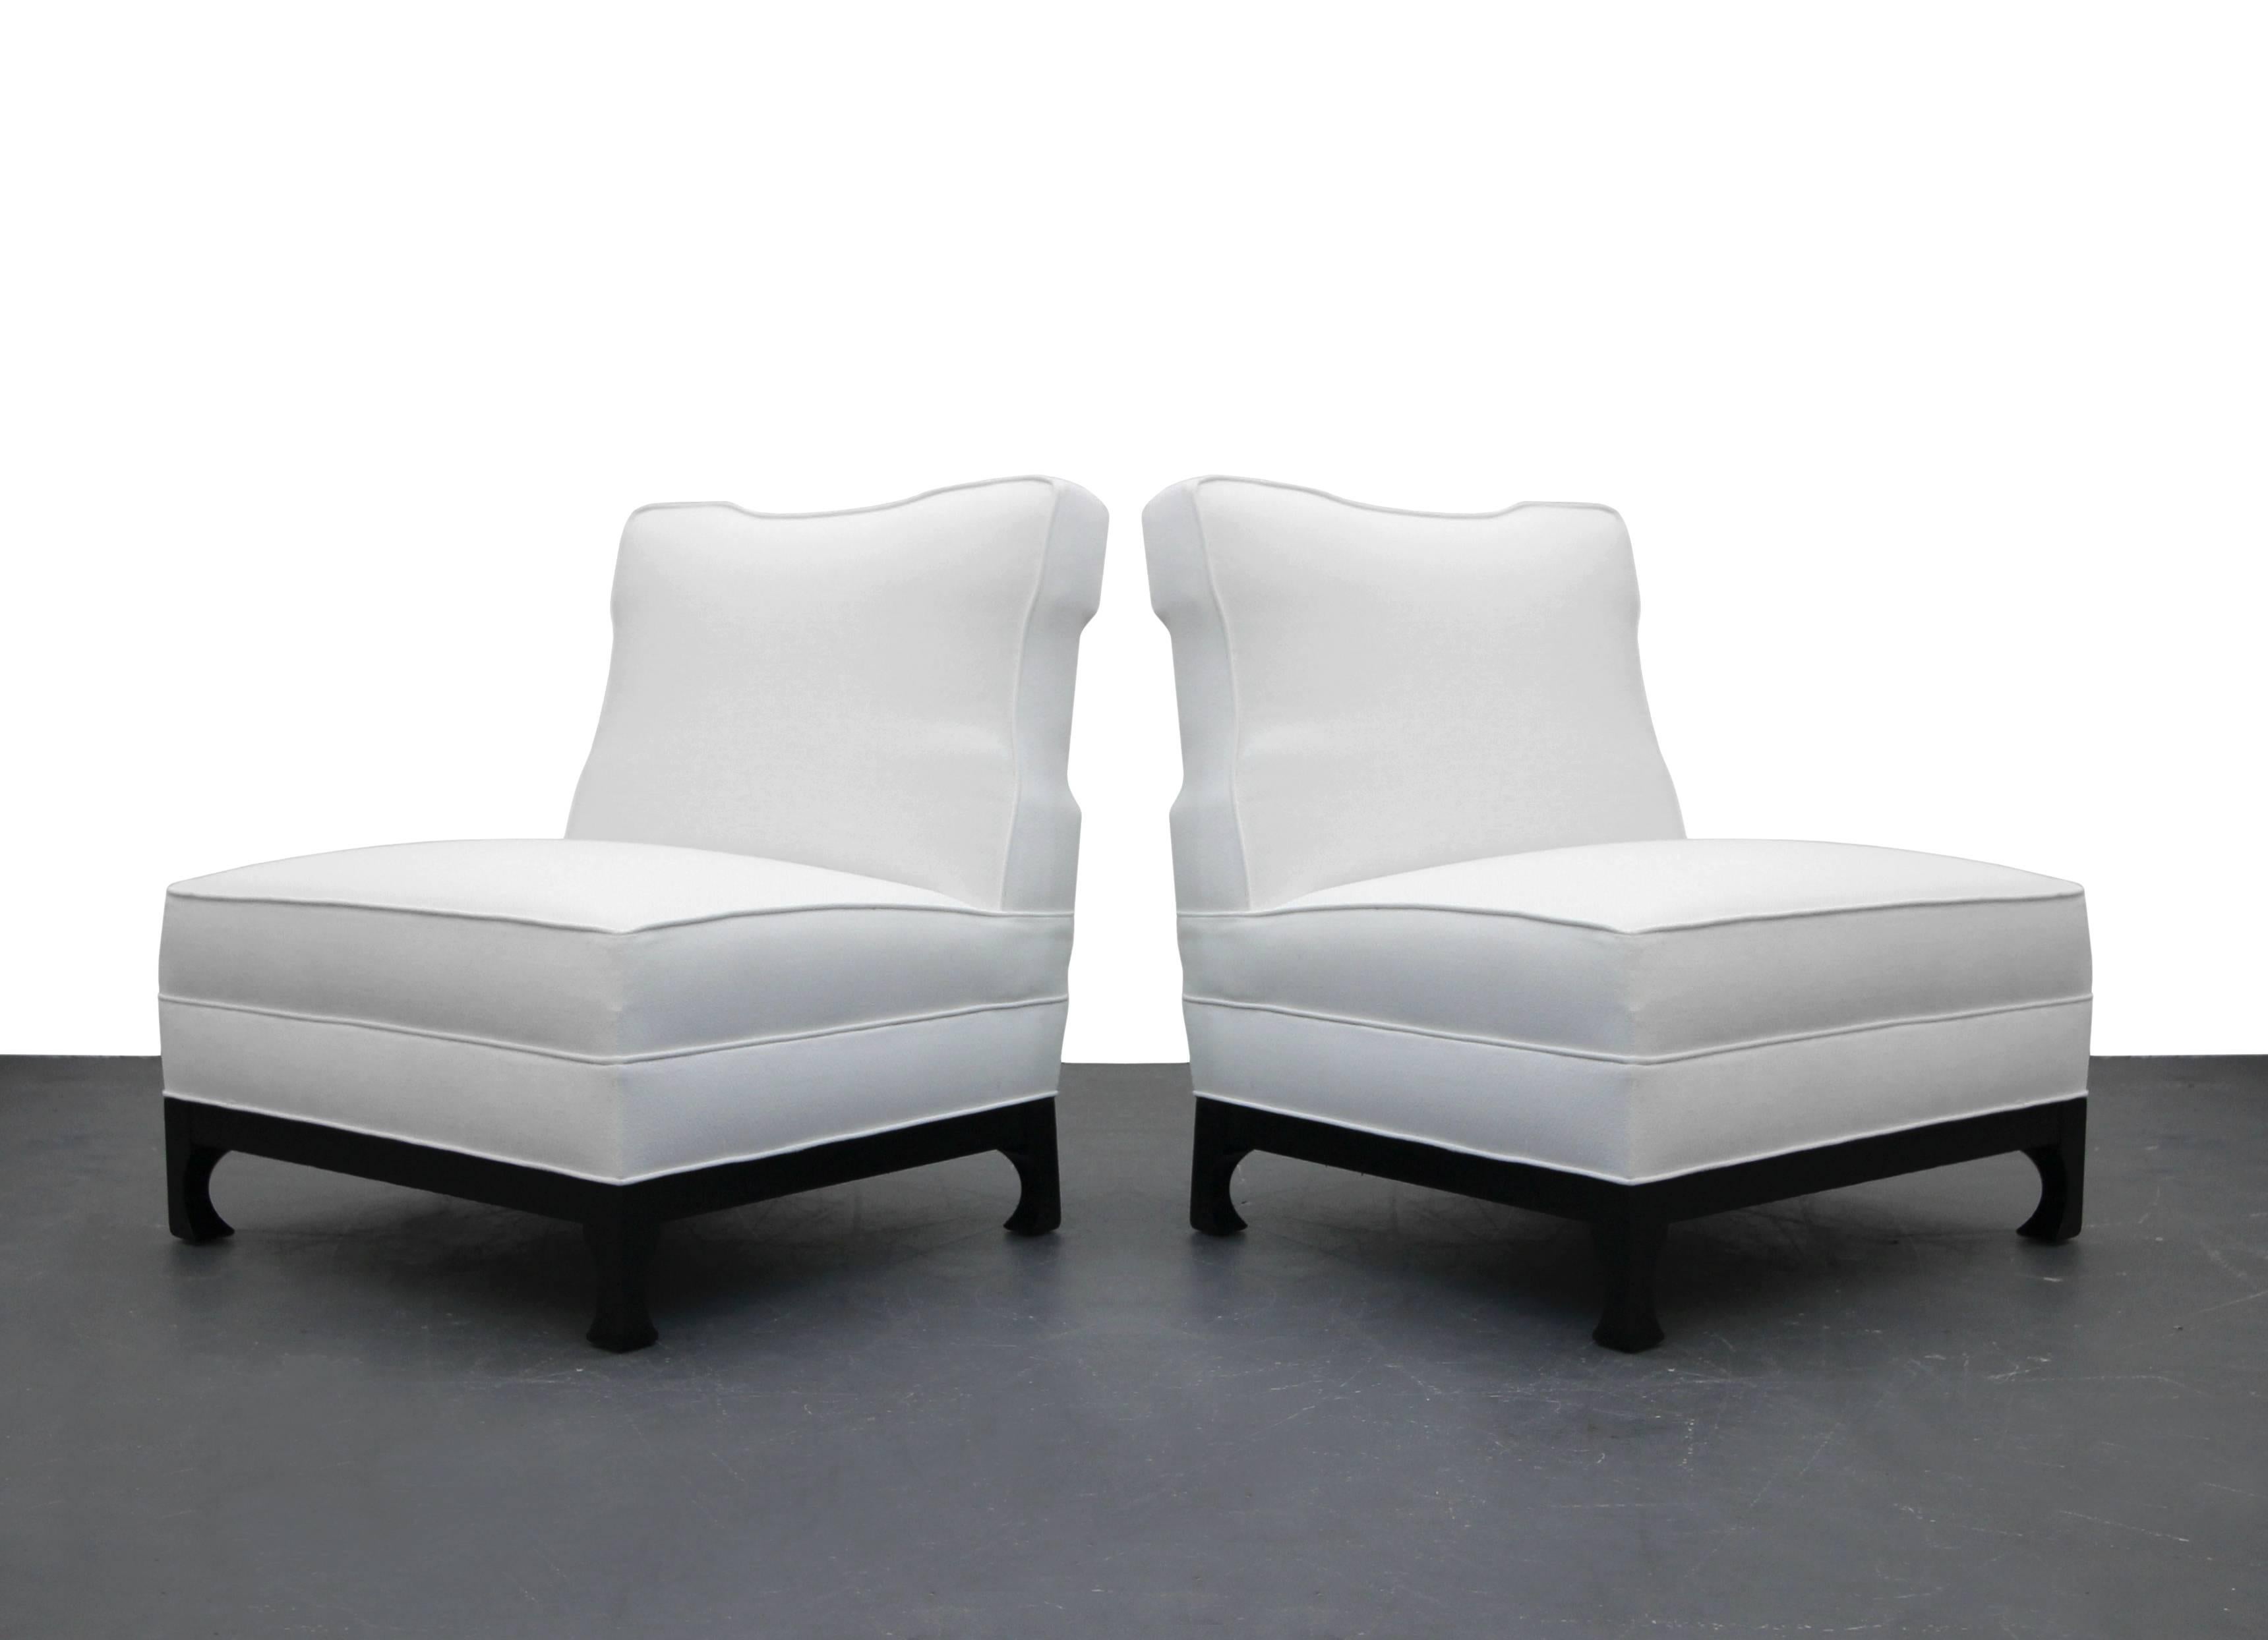 Absolutely stunning pair of Asian style slipper chairs by James Mont. These chairs are wonderfully sized with beautiful details.

They have been expertly restored with all new foam and fabric in a beautiful white woven tweed on sculpted black